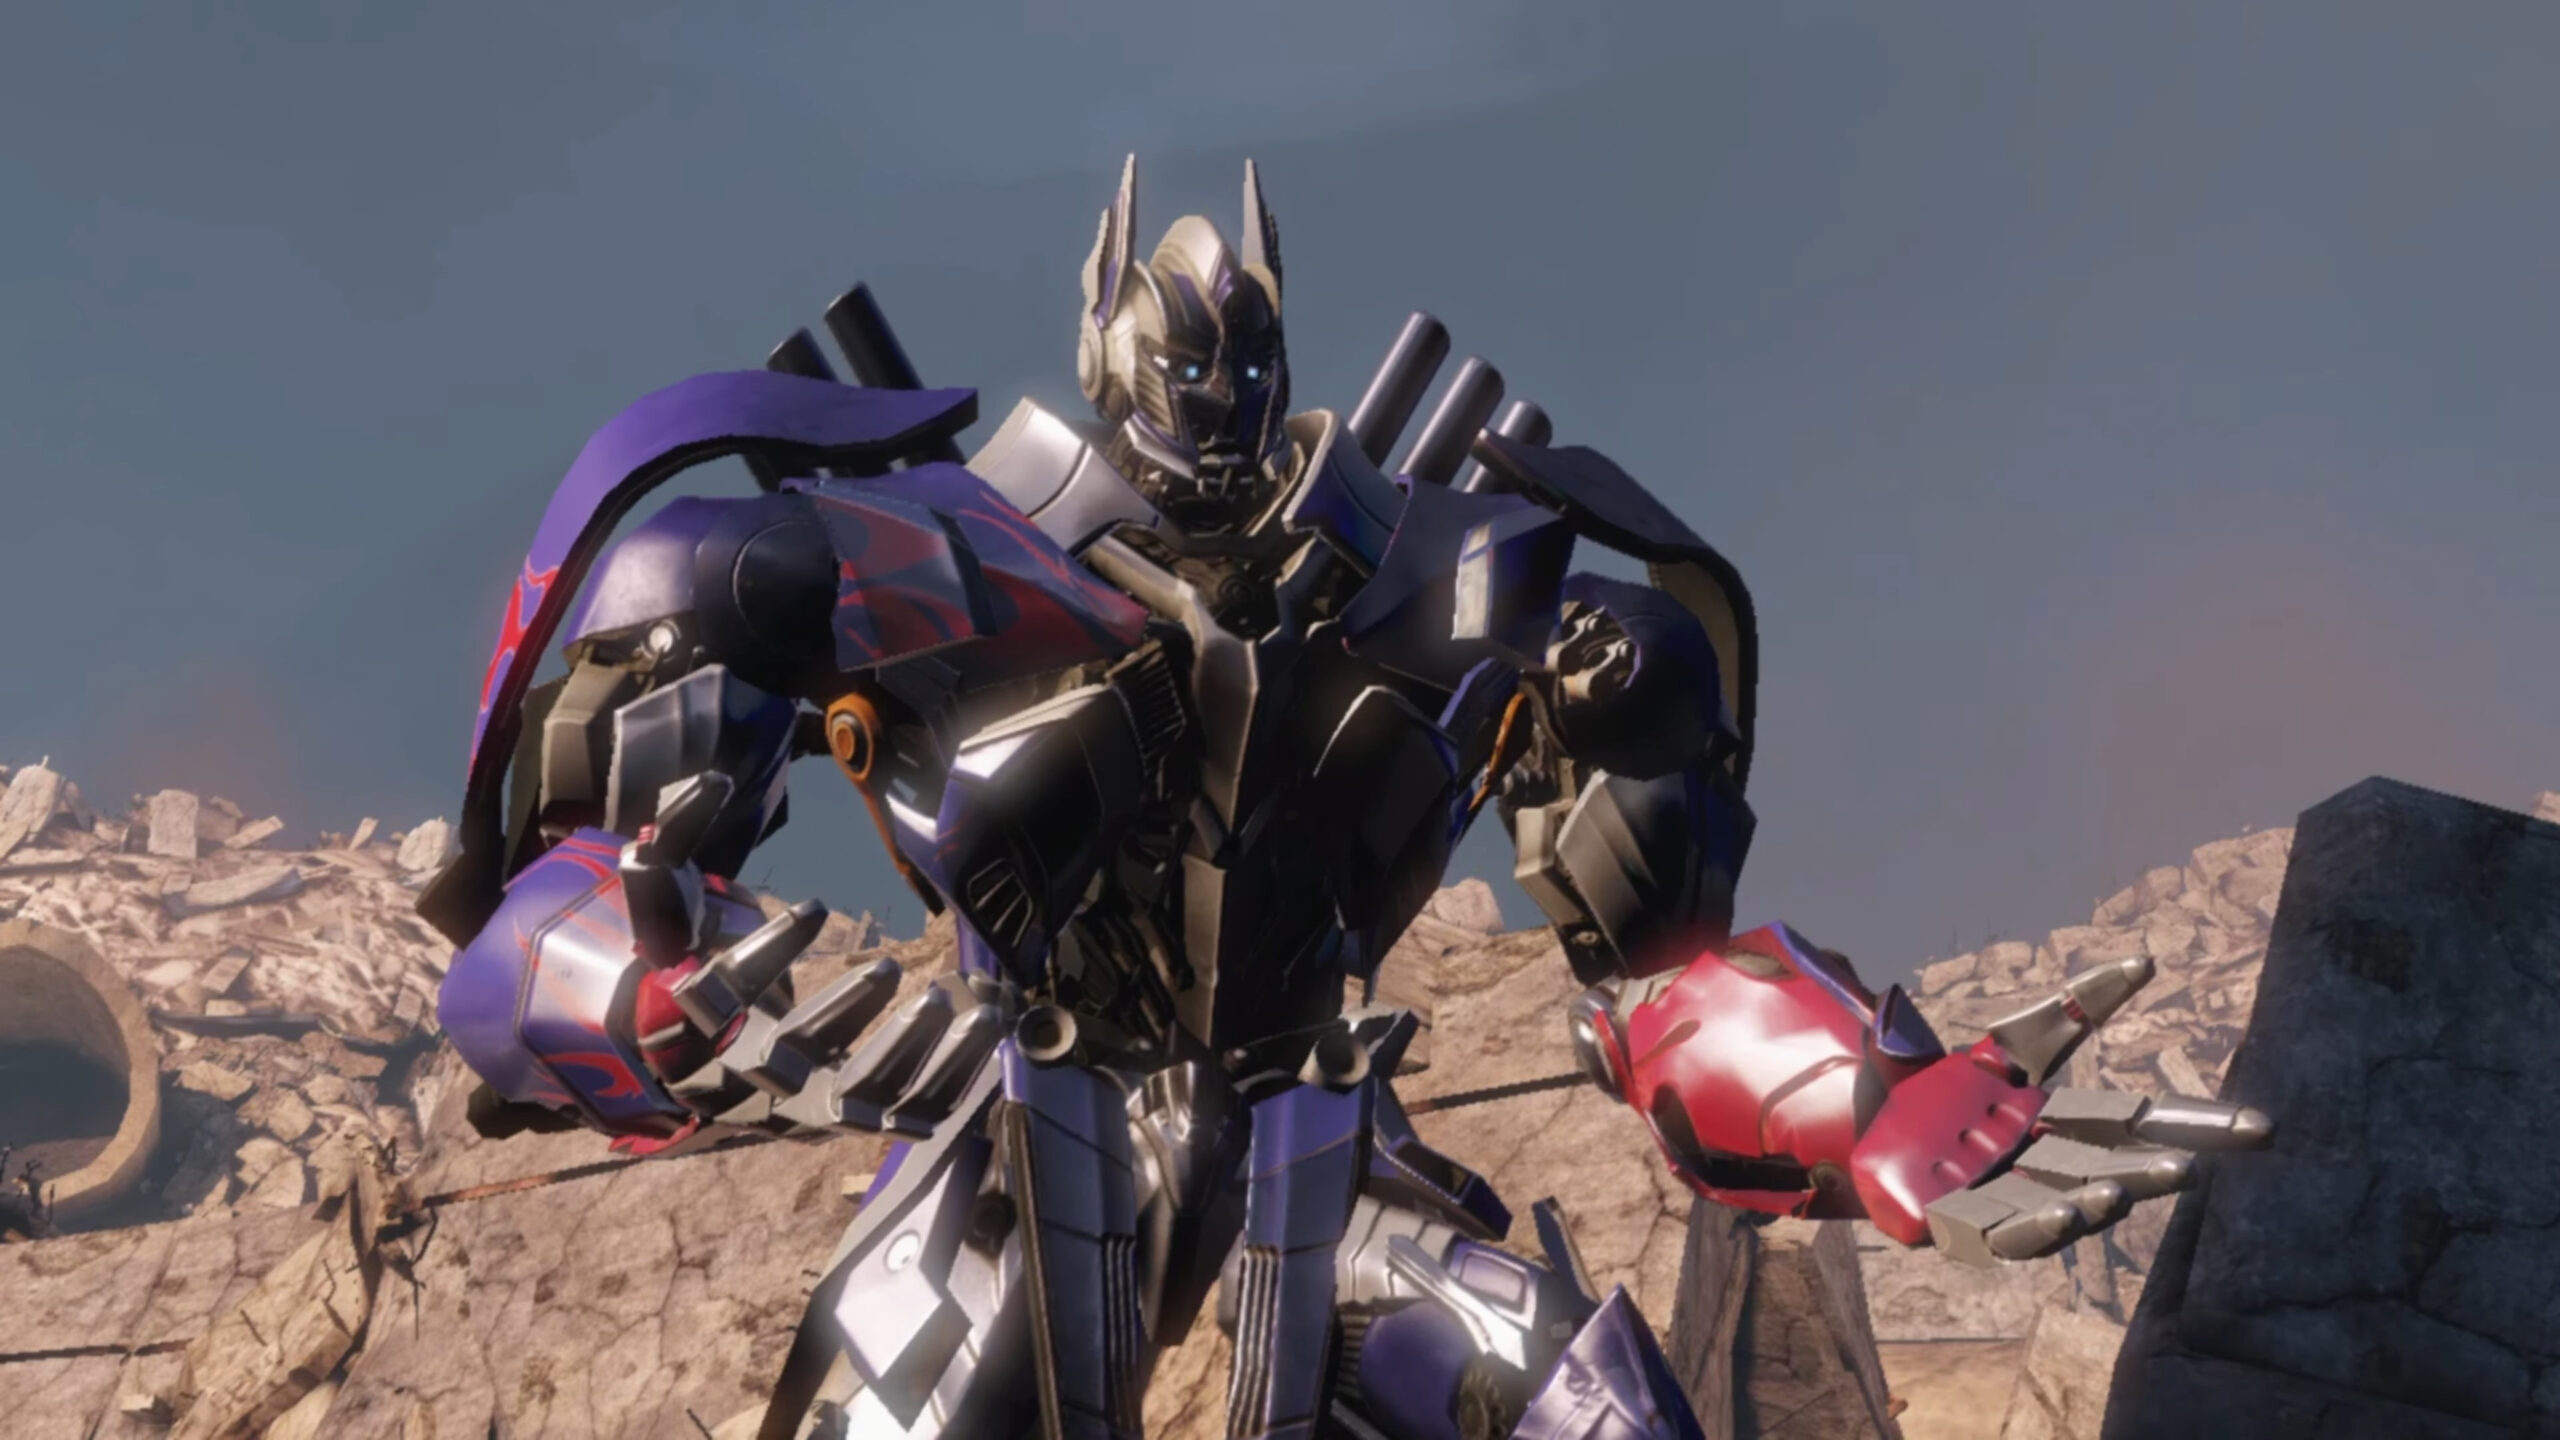 Optimus Prime (Peter Cullen) makes a plea for peace in Transformers: Rise of the Darkspark (2014), Activision